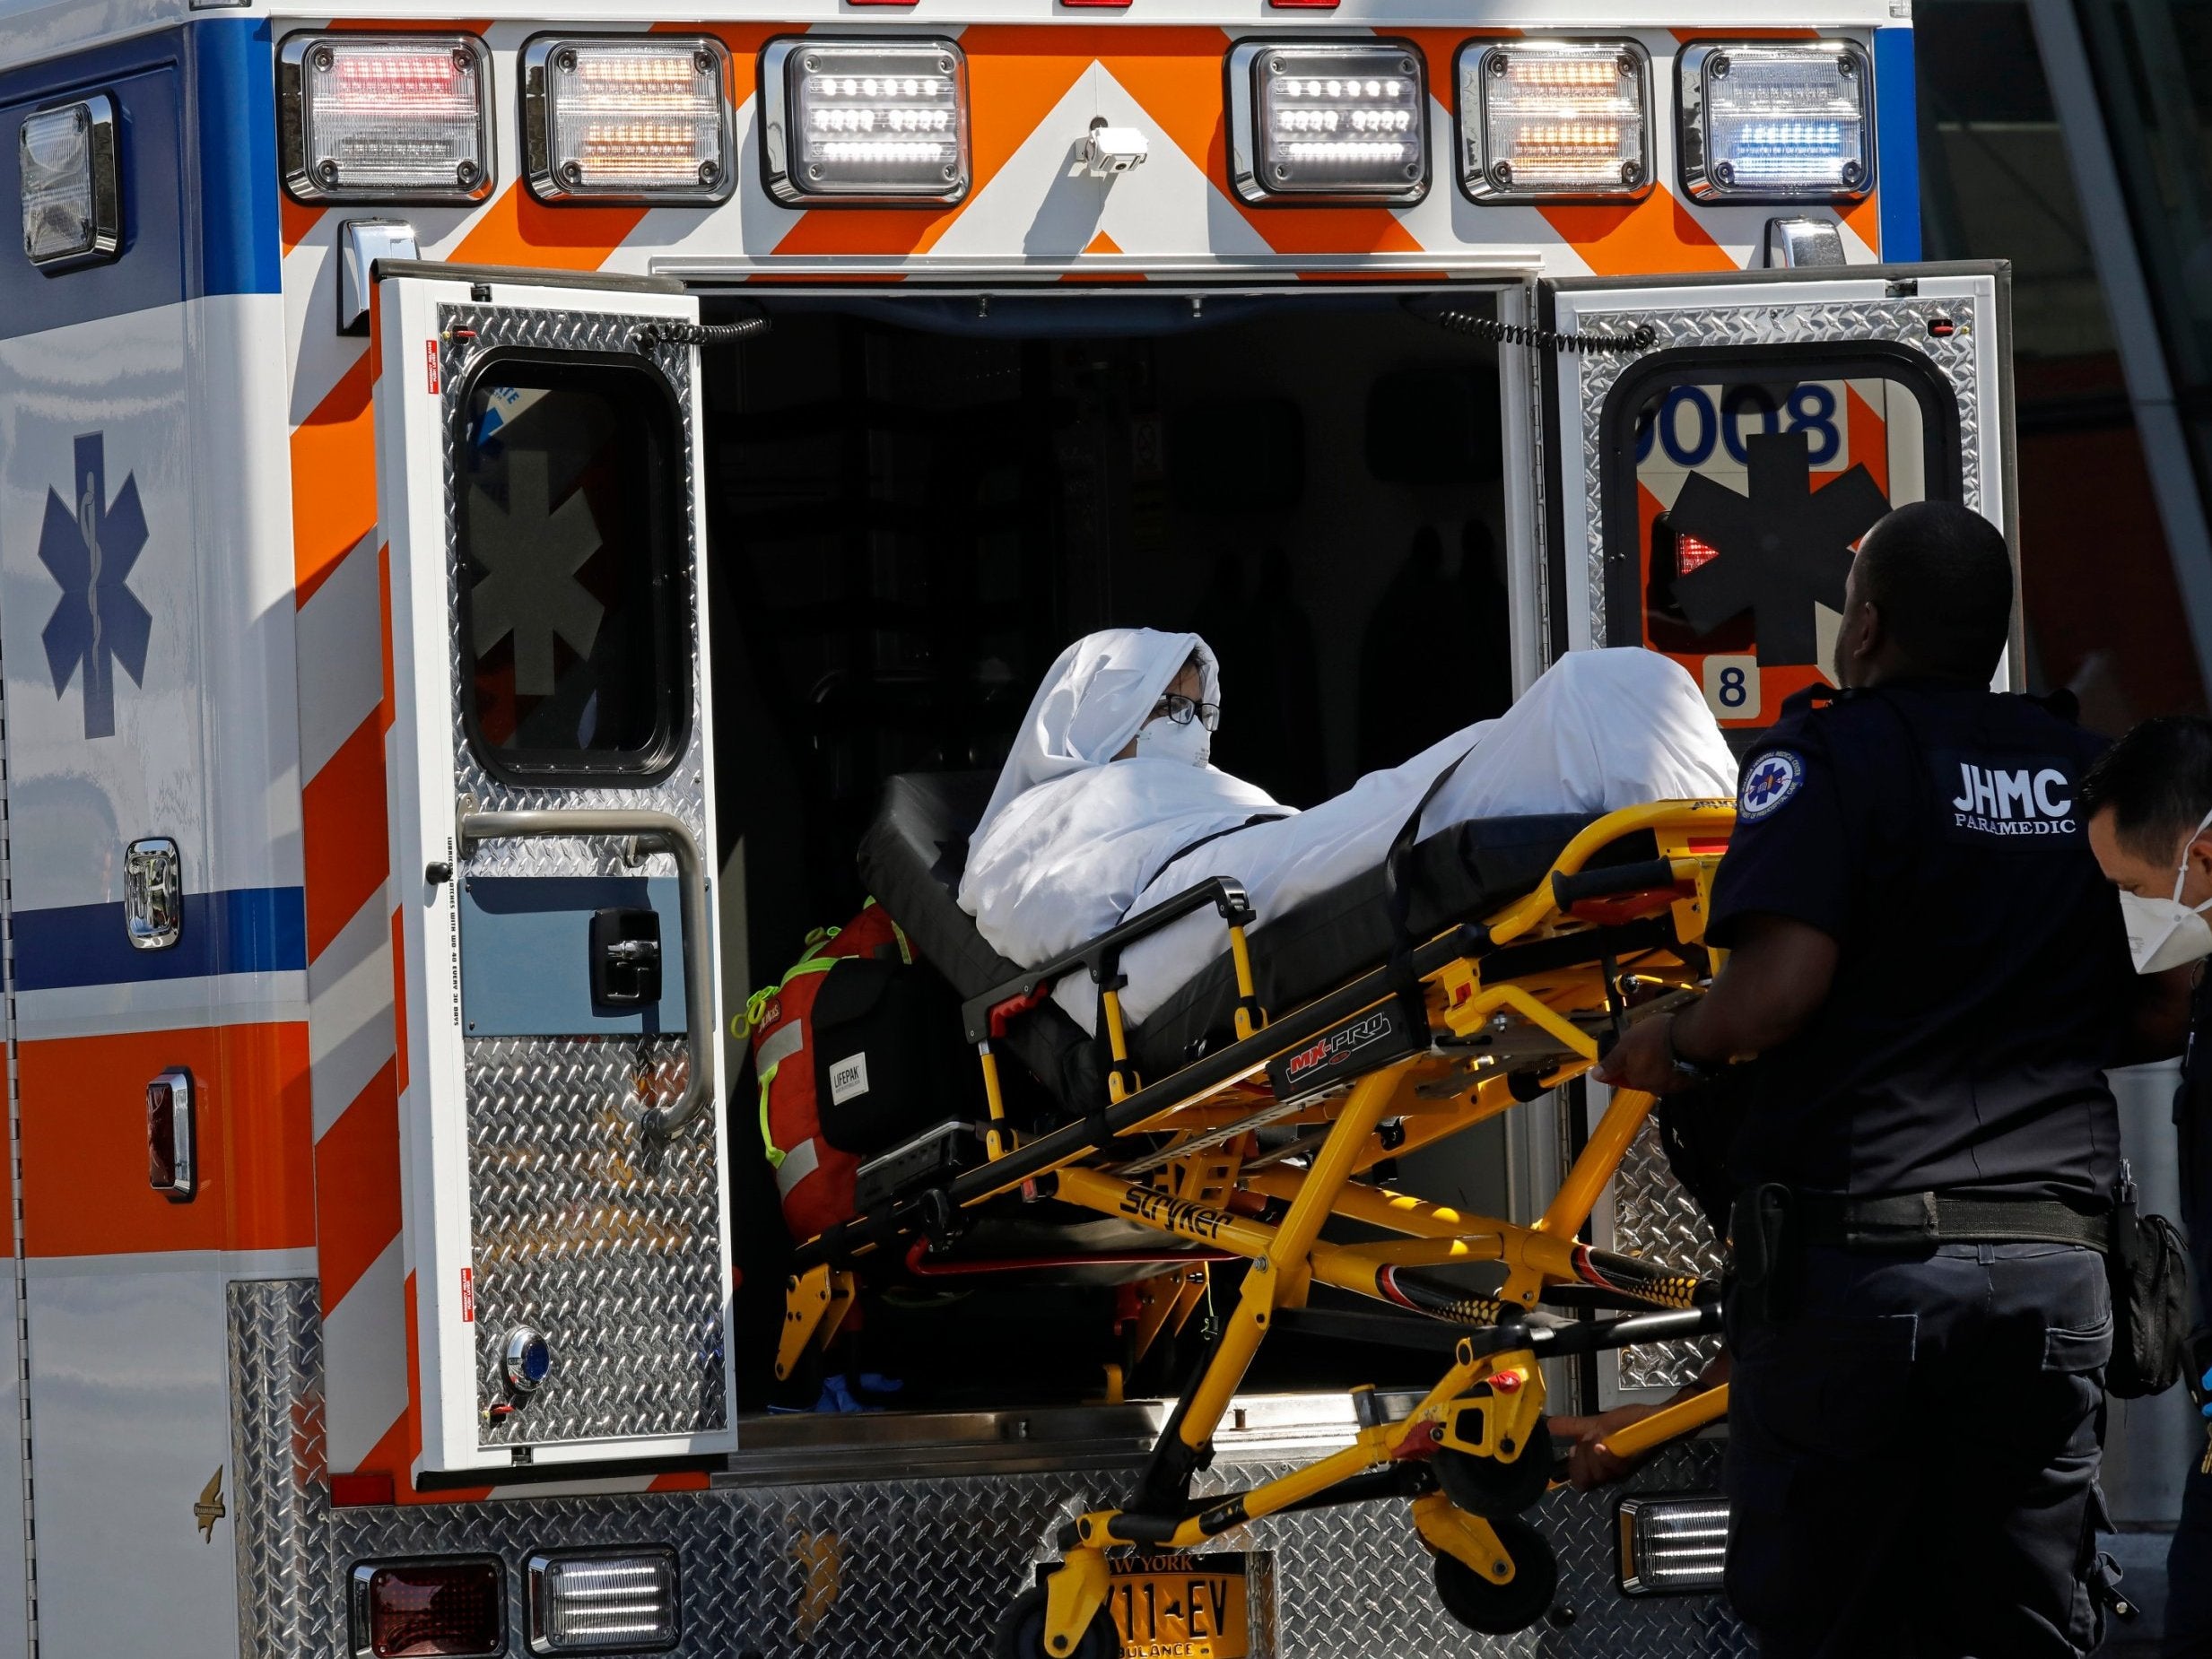 A passenger is taken from a quarantined plane onto an ambulance at JFK airport